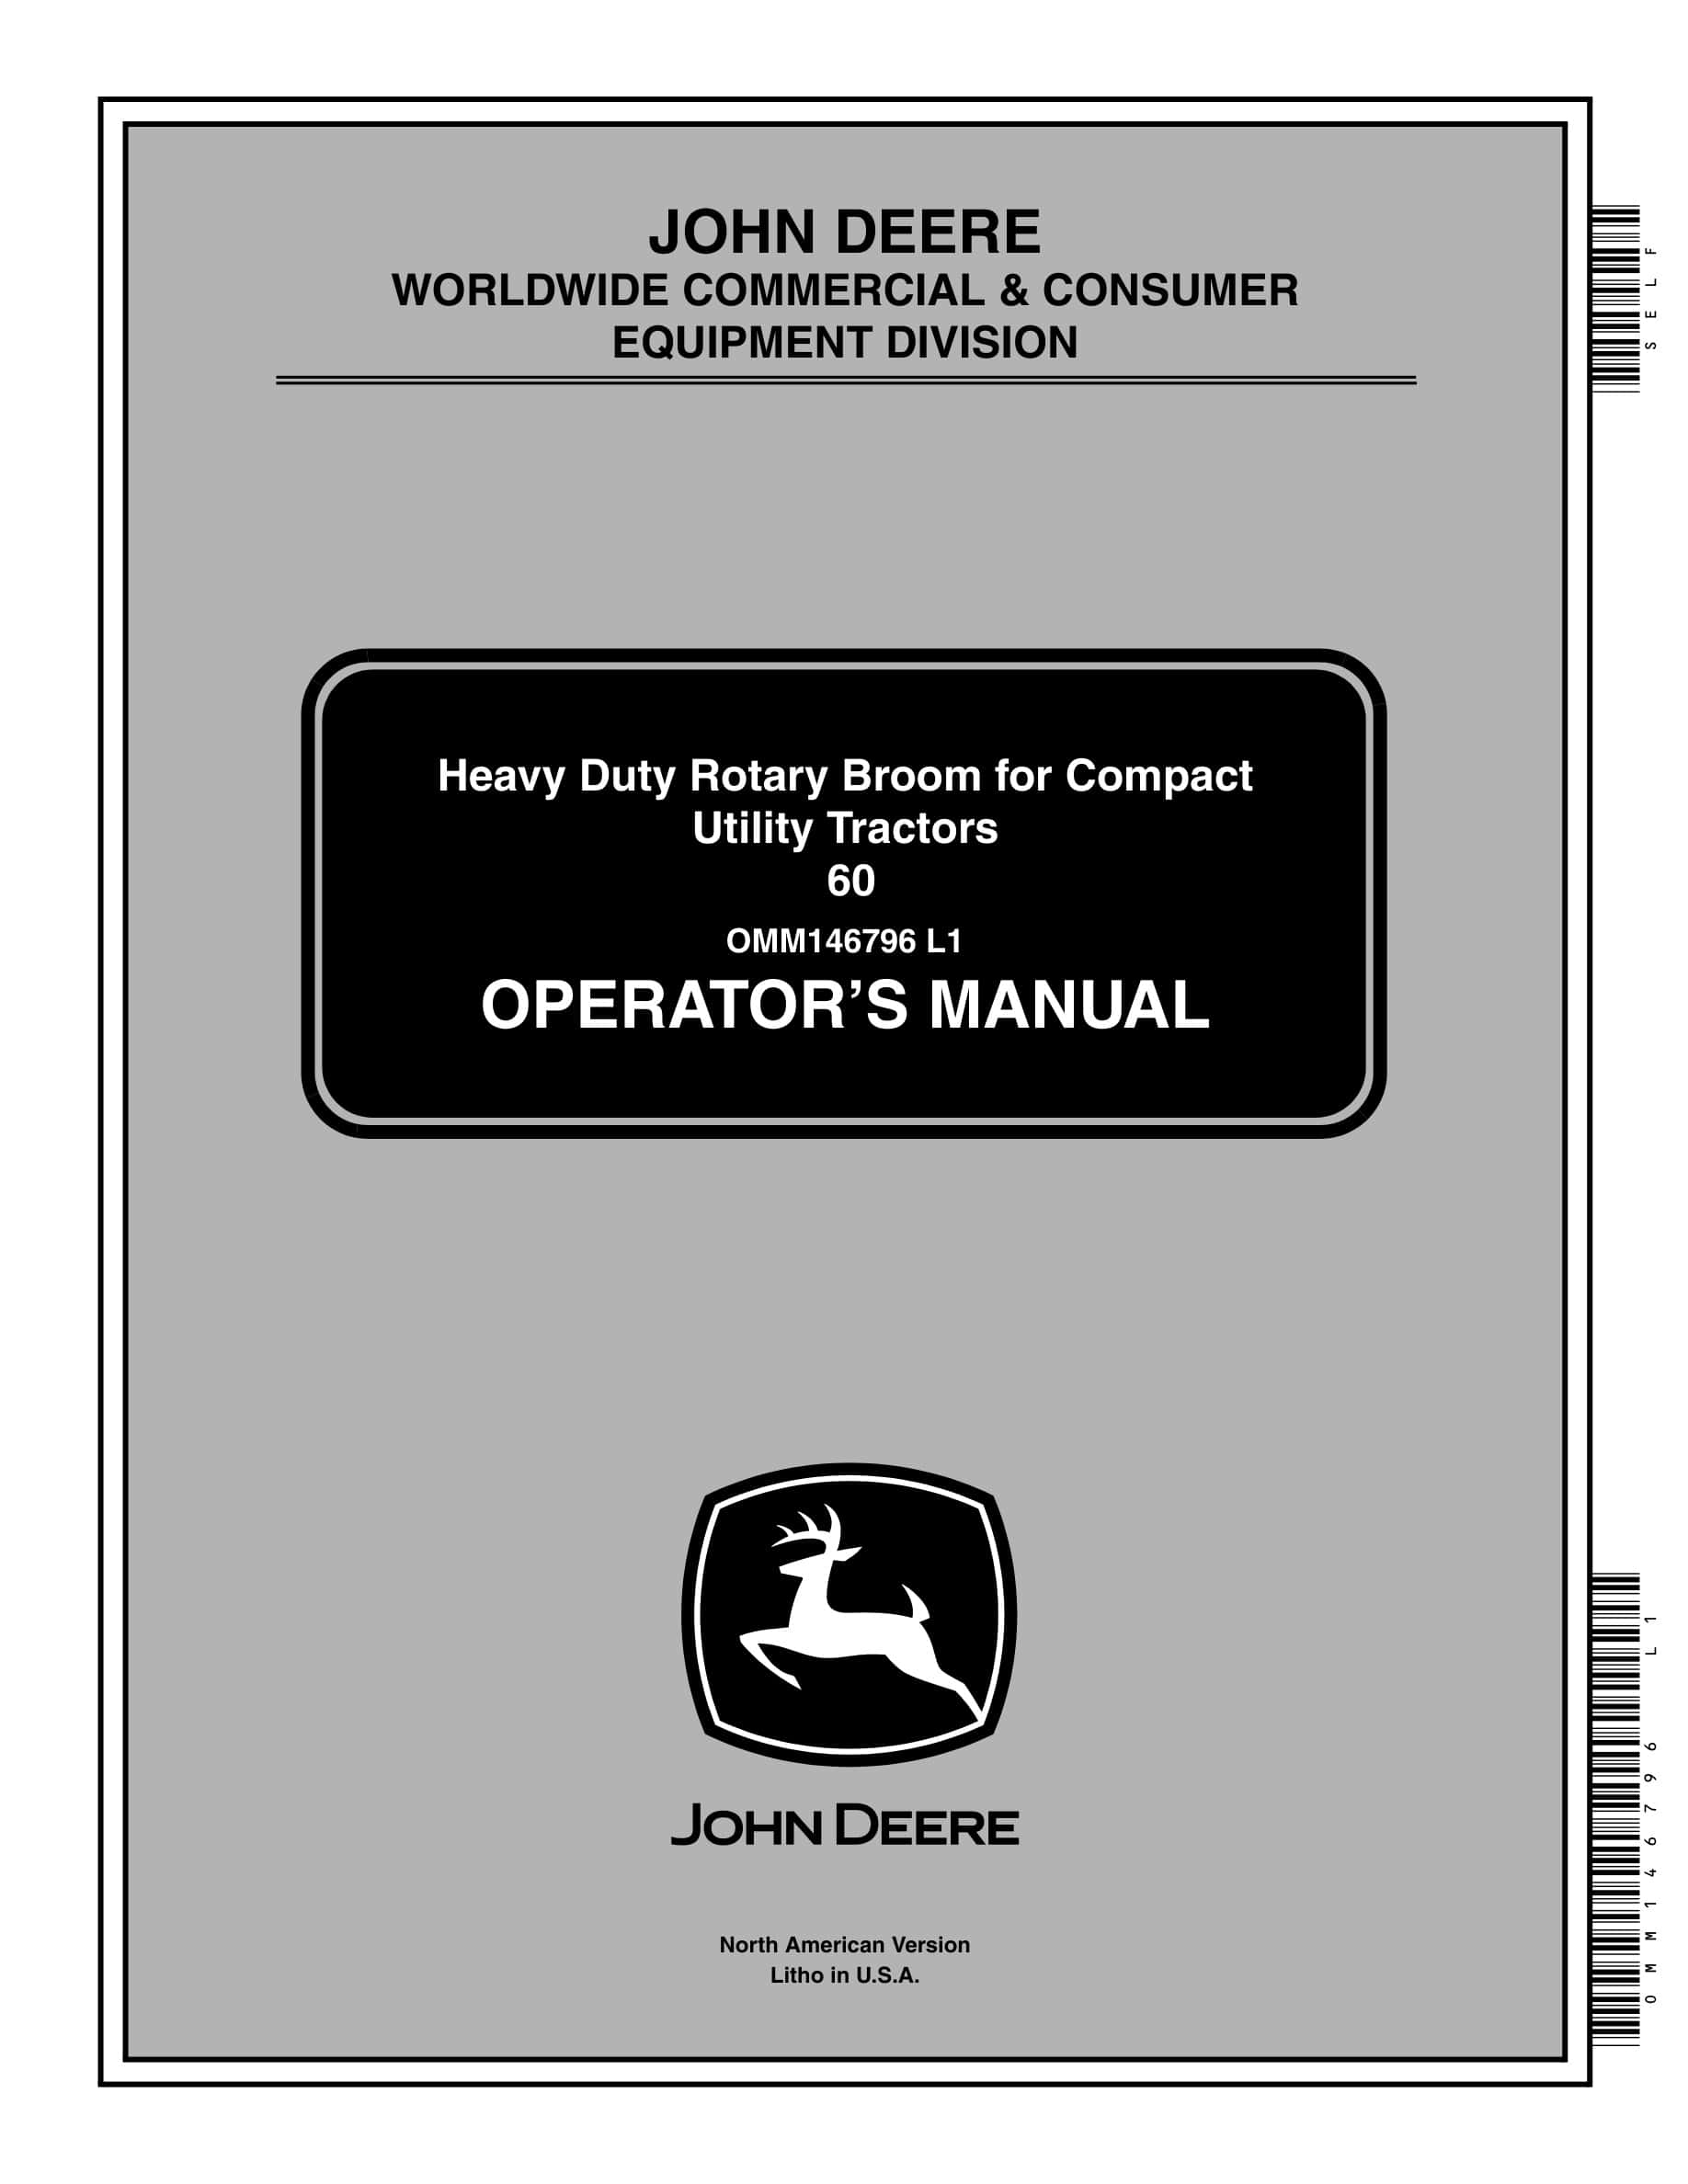 John Deere Heavy Duty Rotary Broom For 60 Compact Utility Tractors Operator Manuals OMM146796-1